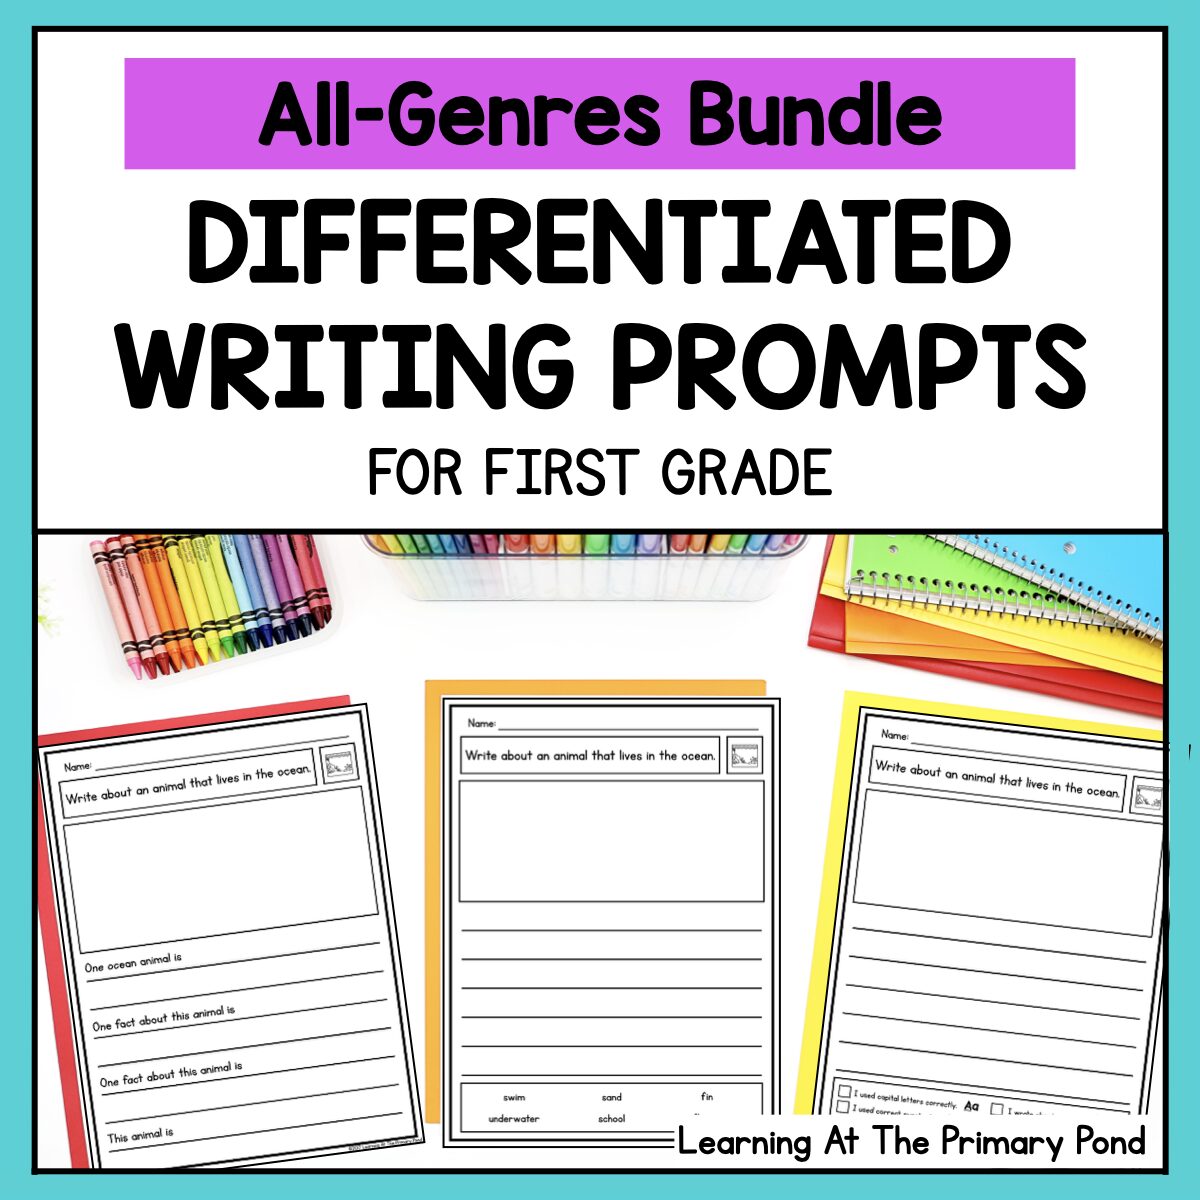 DIFERENTIATED WRITING PROMTS FOR FIRST GRADE